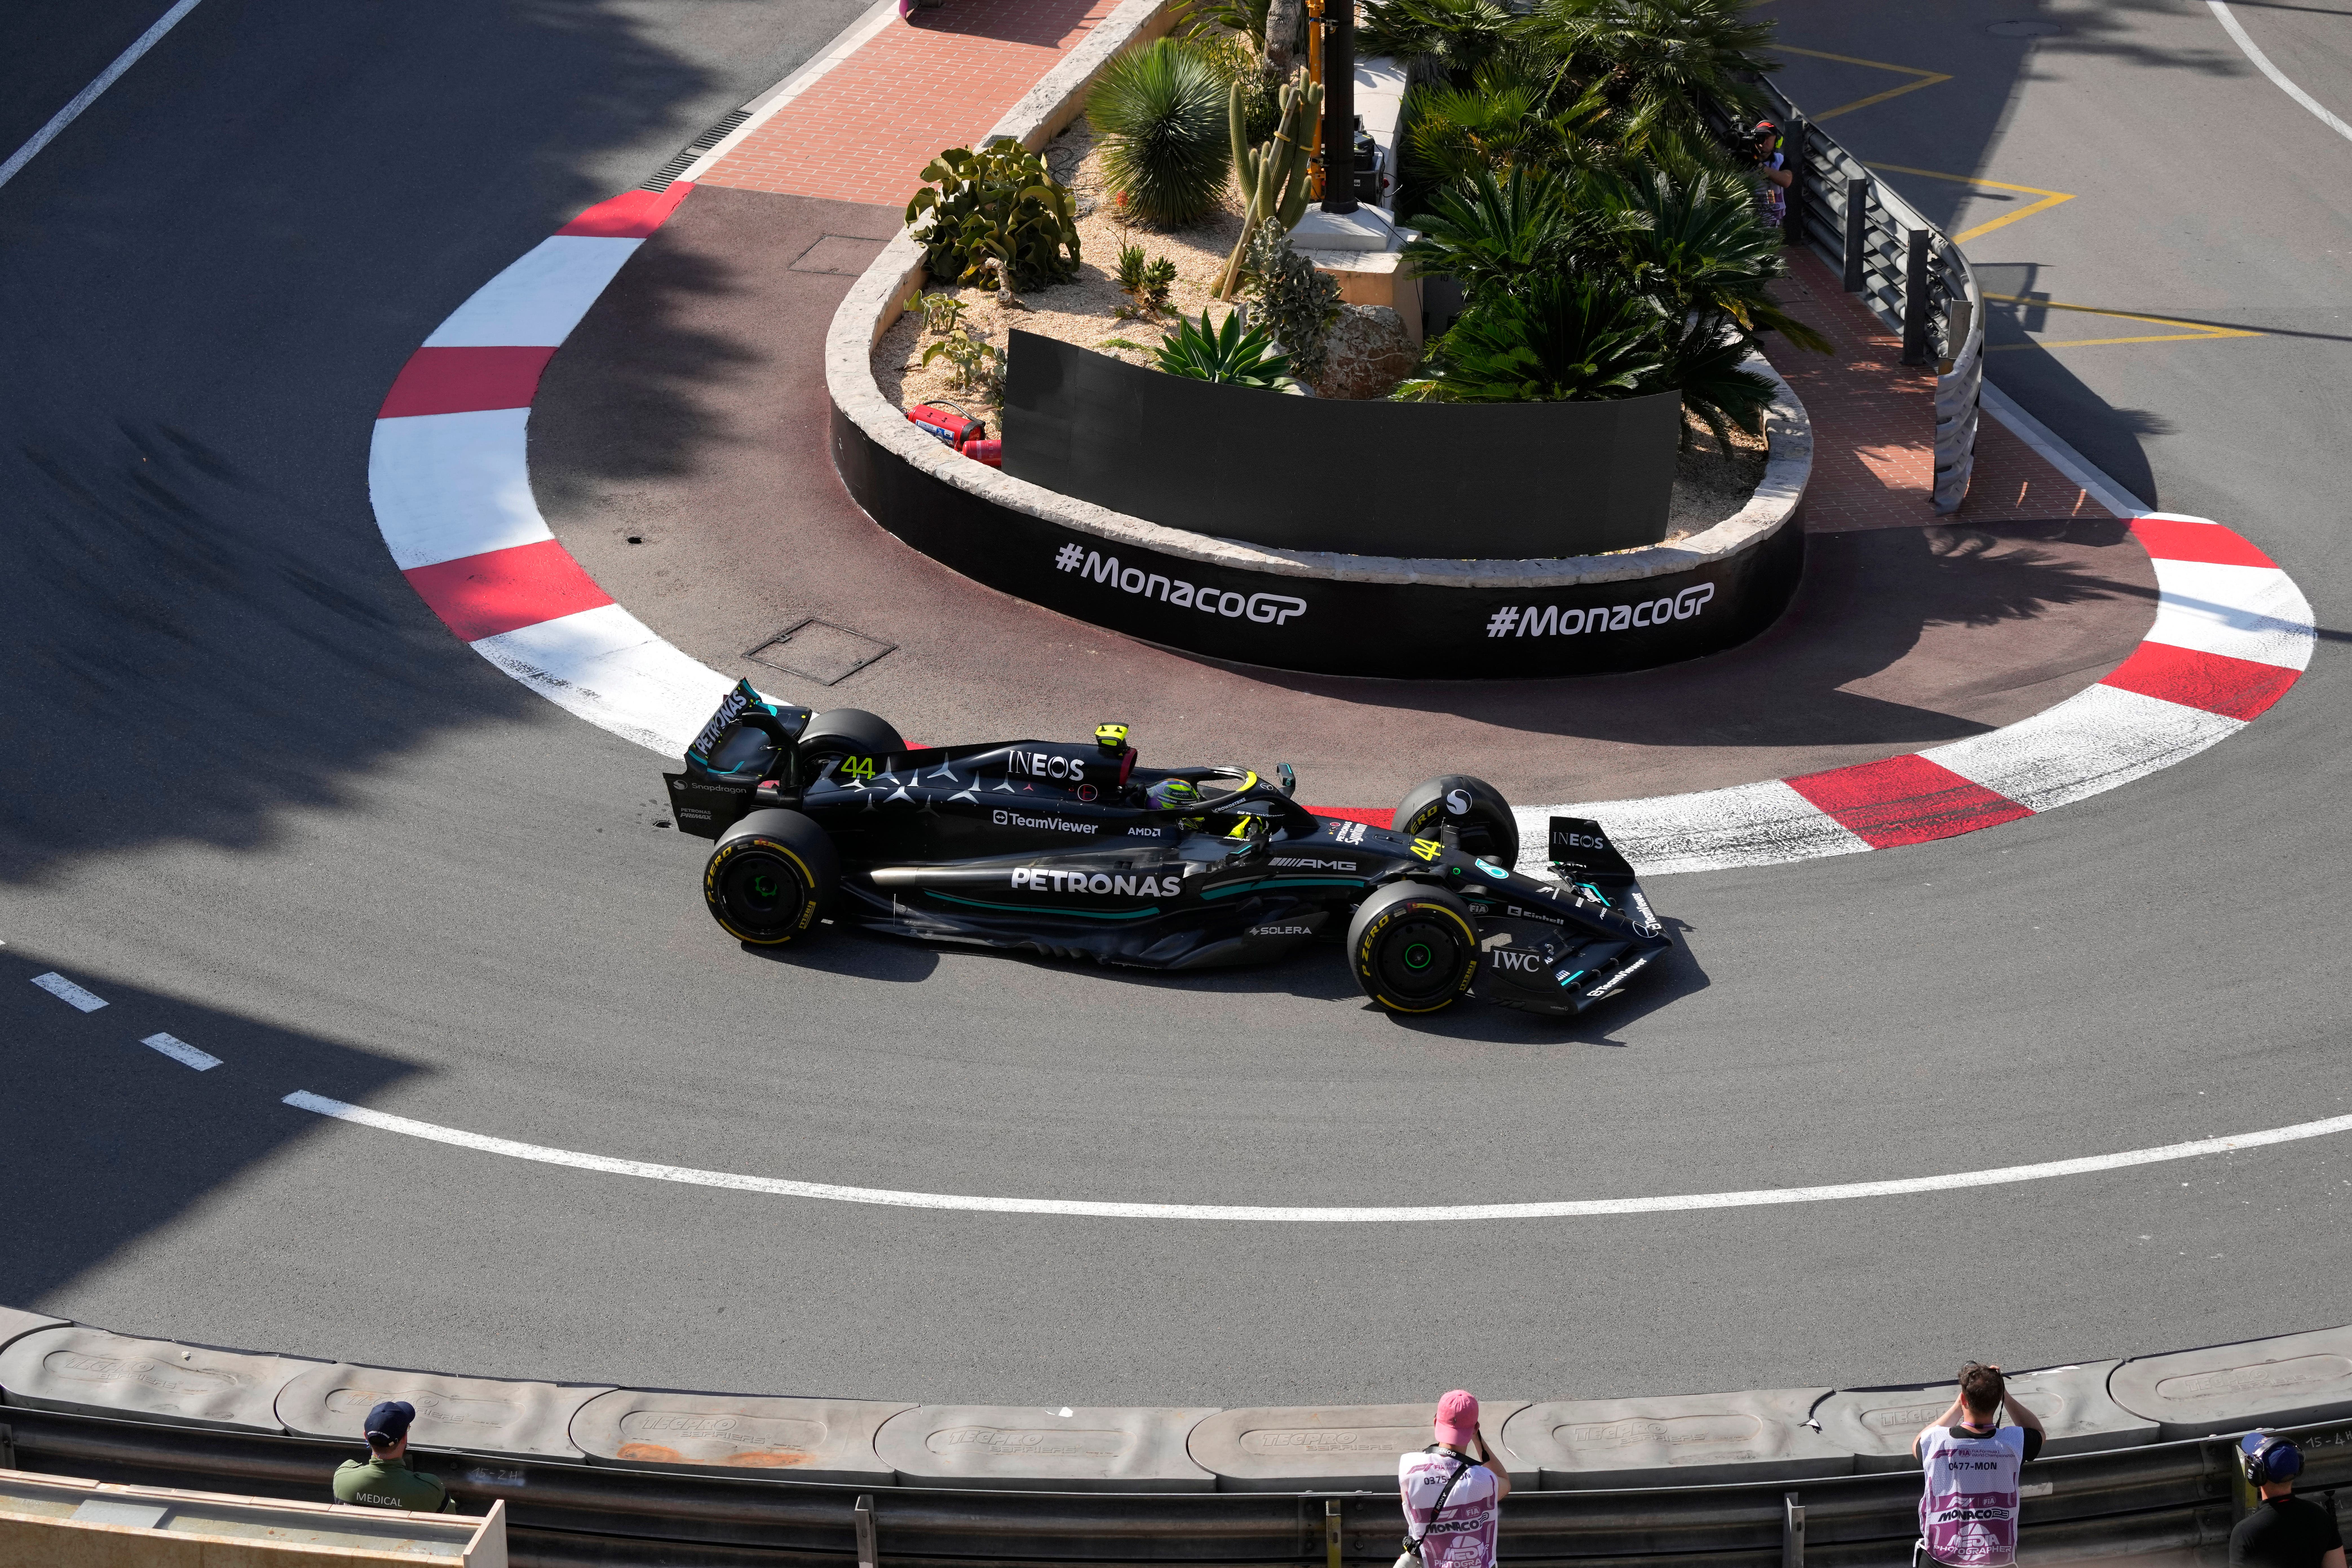 Lewis Hamilton in action in the new Mercedes around the streets of Monaco